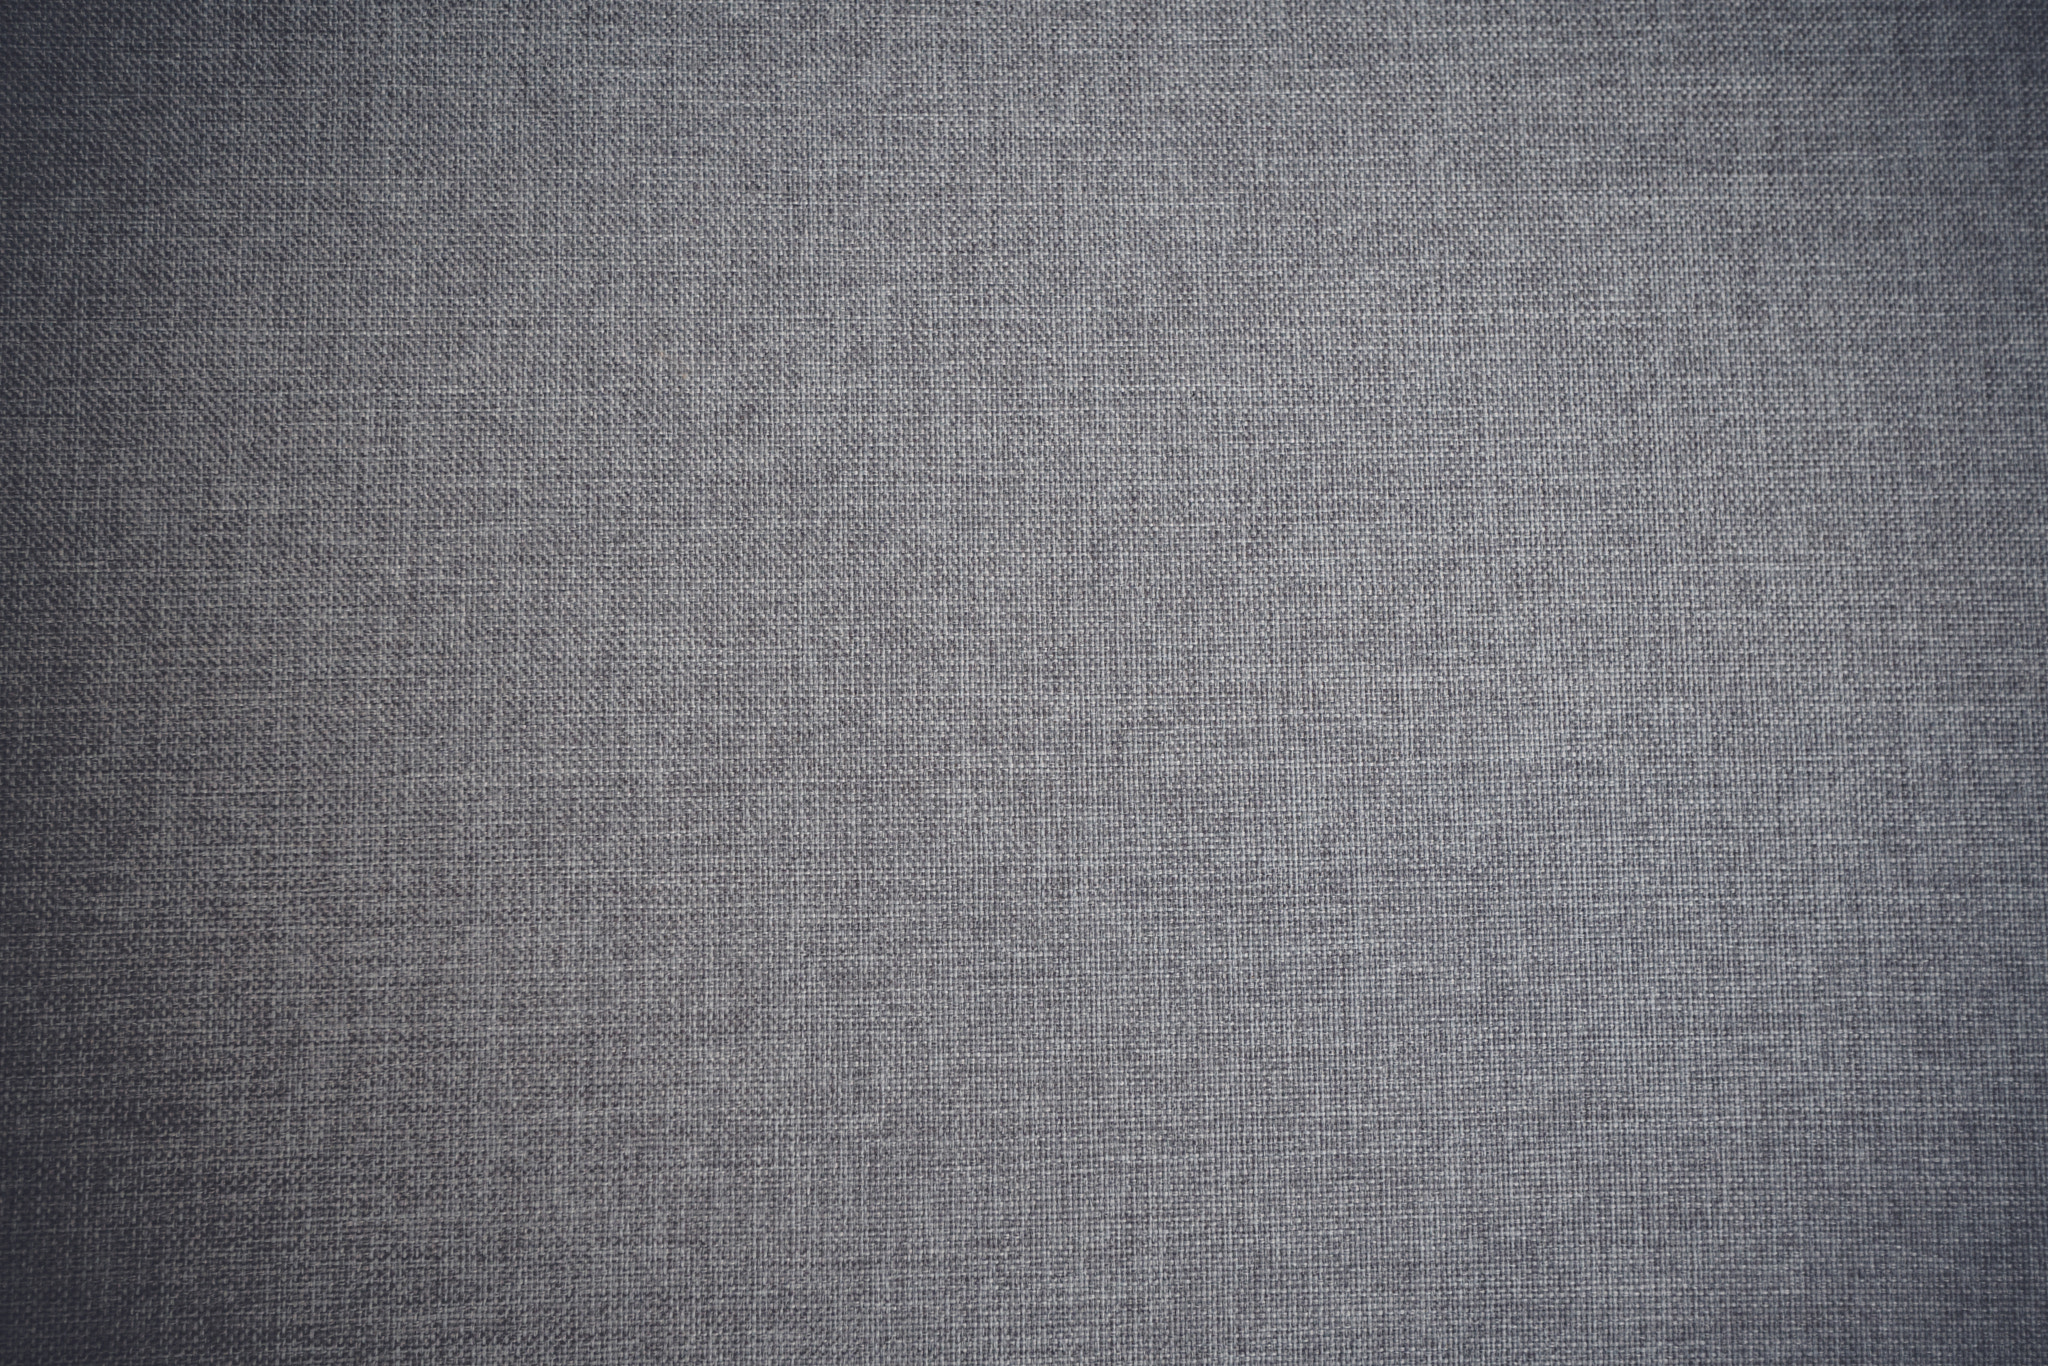 Sony a99 II sample photo. Textile background in grey color photography